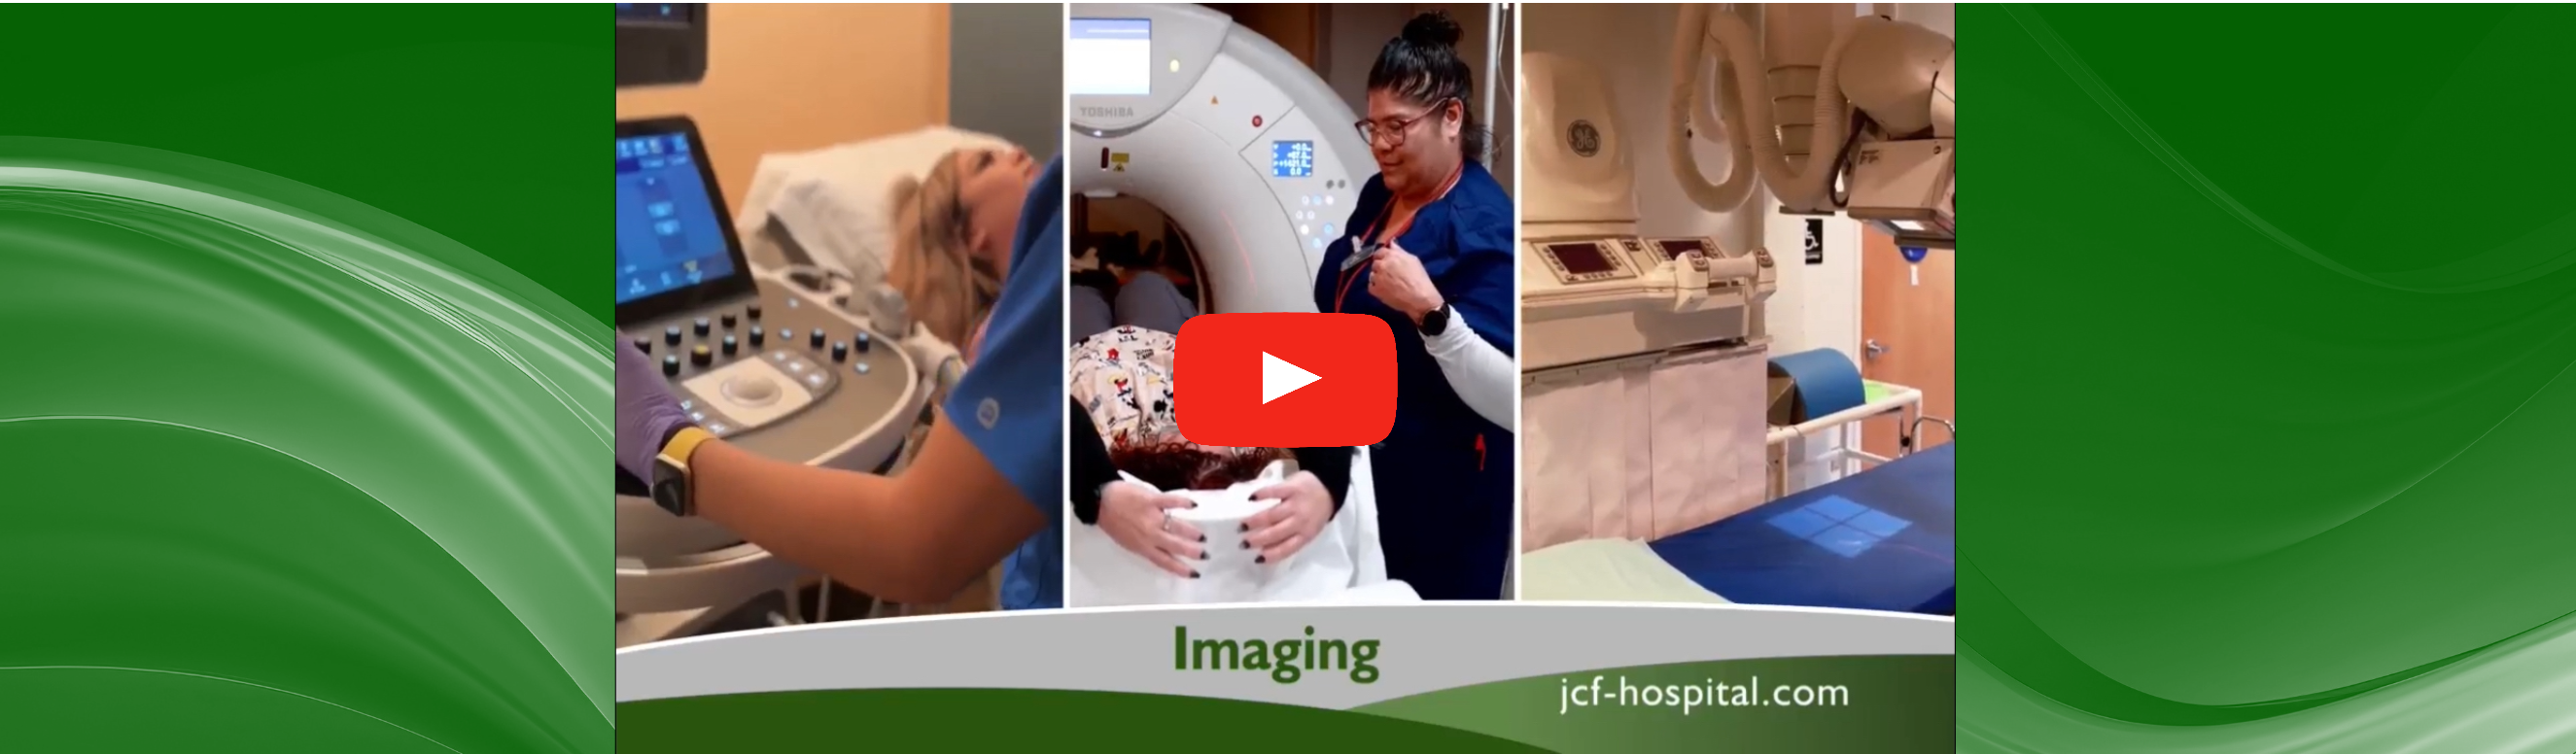 Click here for our commercial about our Imaging department.